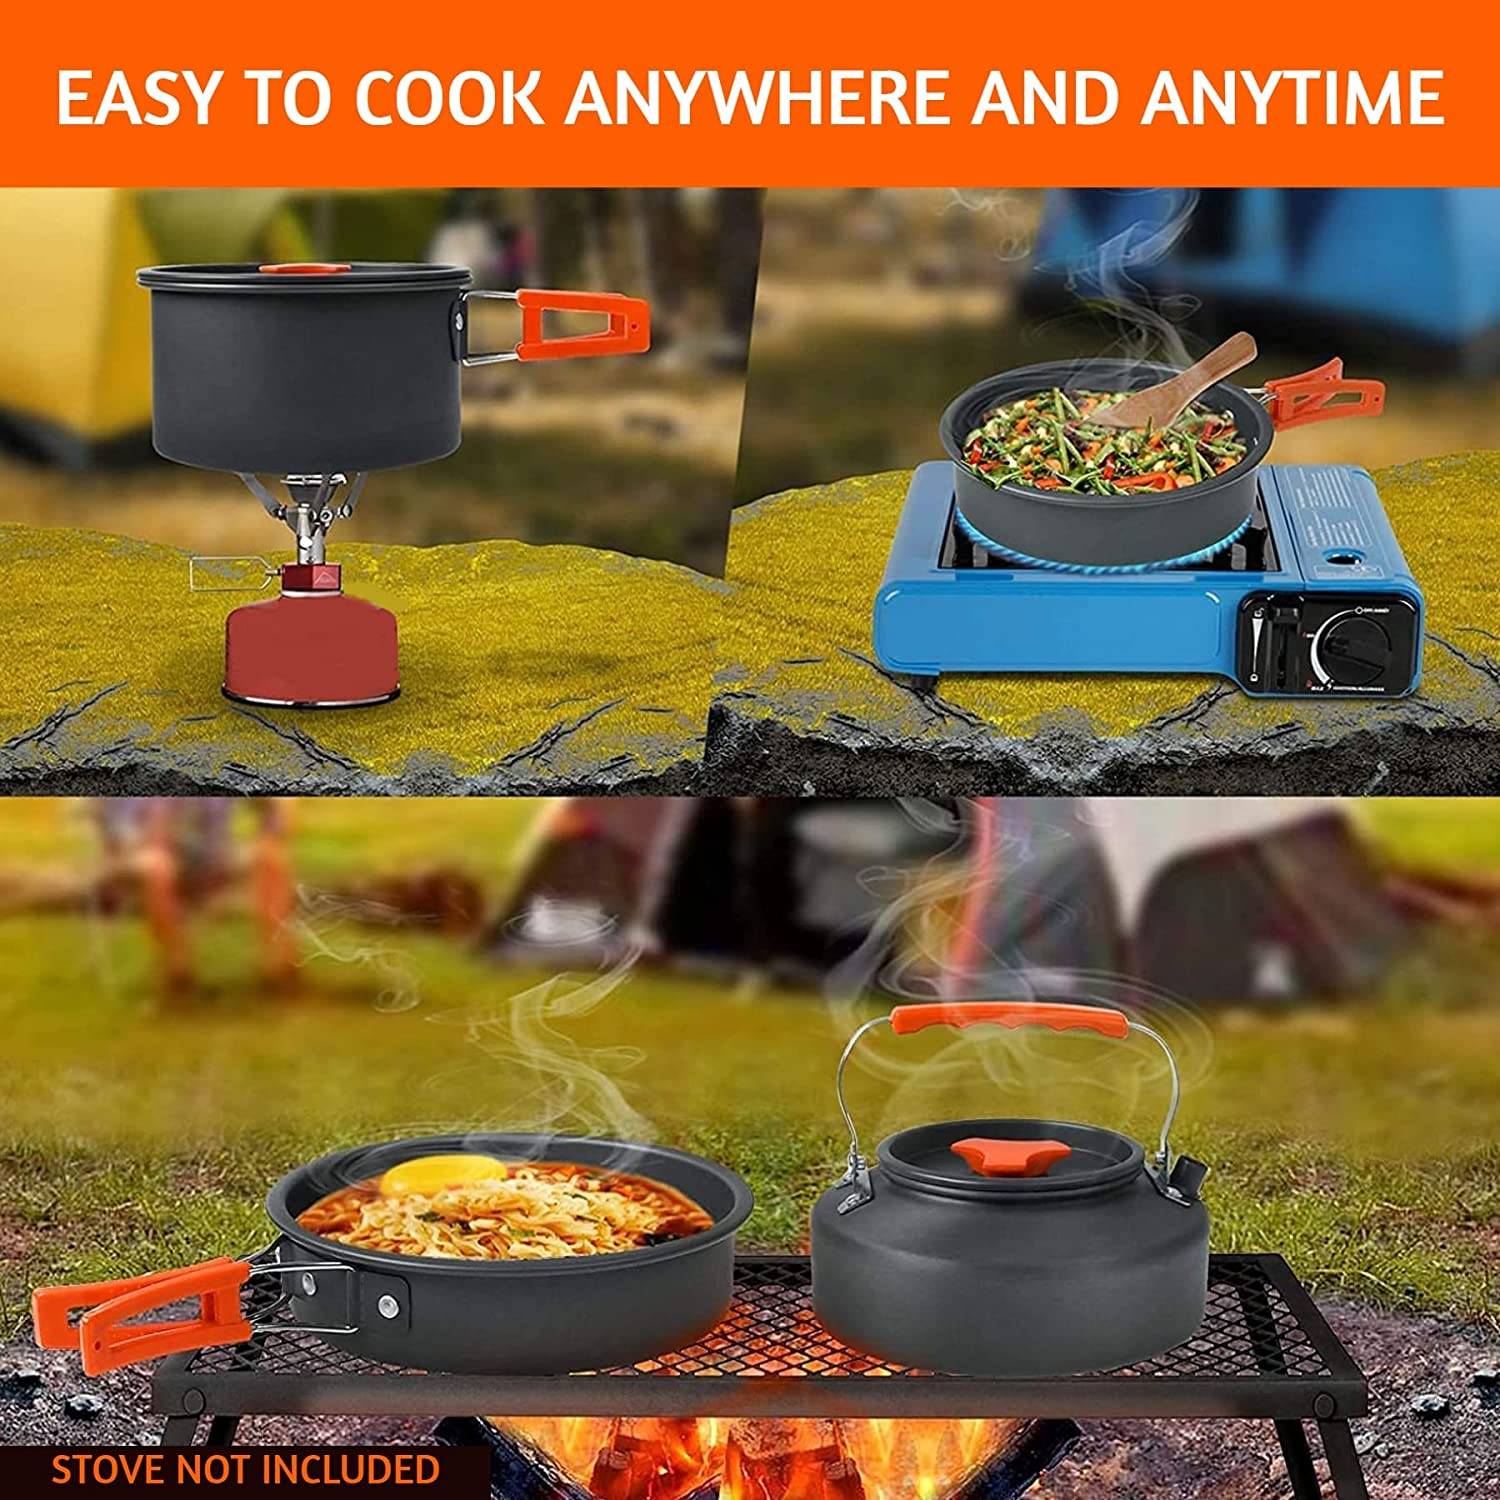 10pcs Camping Cooking Set cookware Mess kit Outdoor Utensils, Portable Trekking Cooking Accessories for Camping Carabiner, Spoon, Bowl, Glass, Non-Stick pan